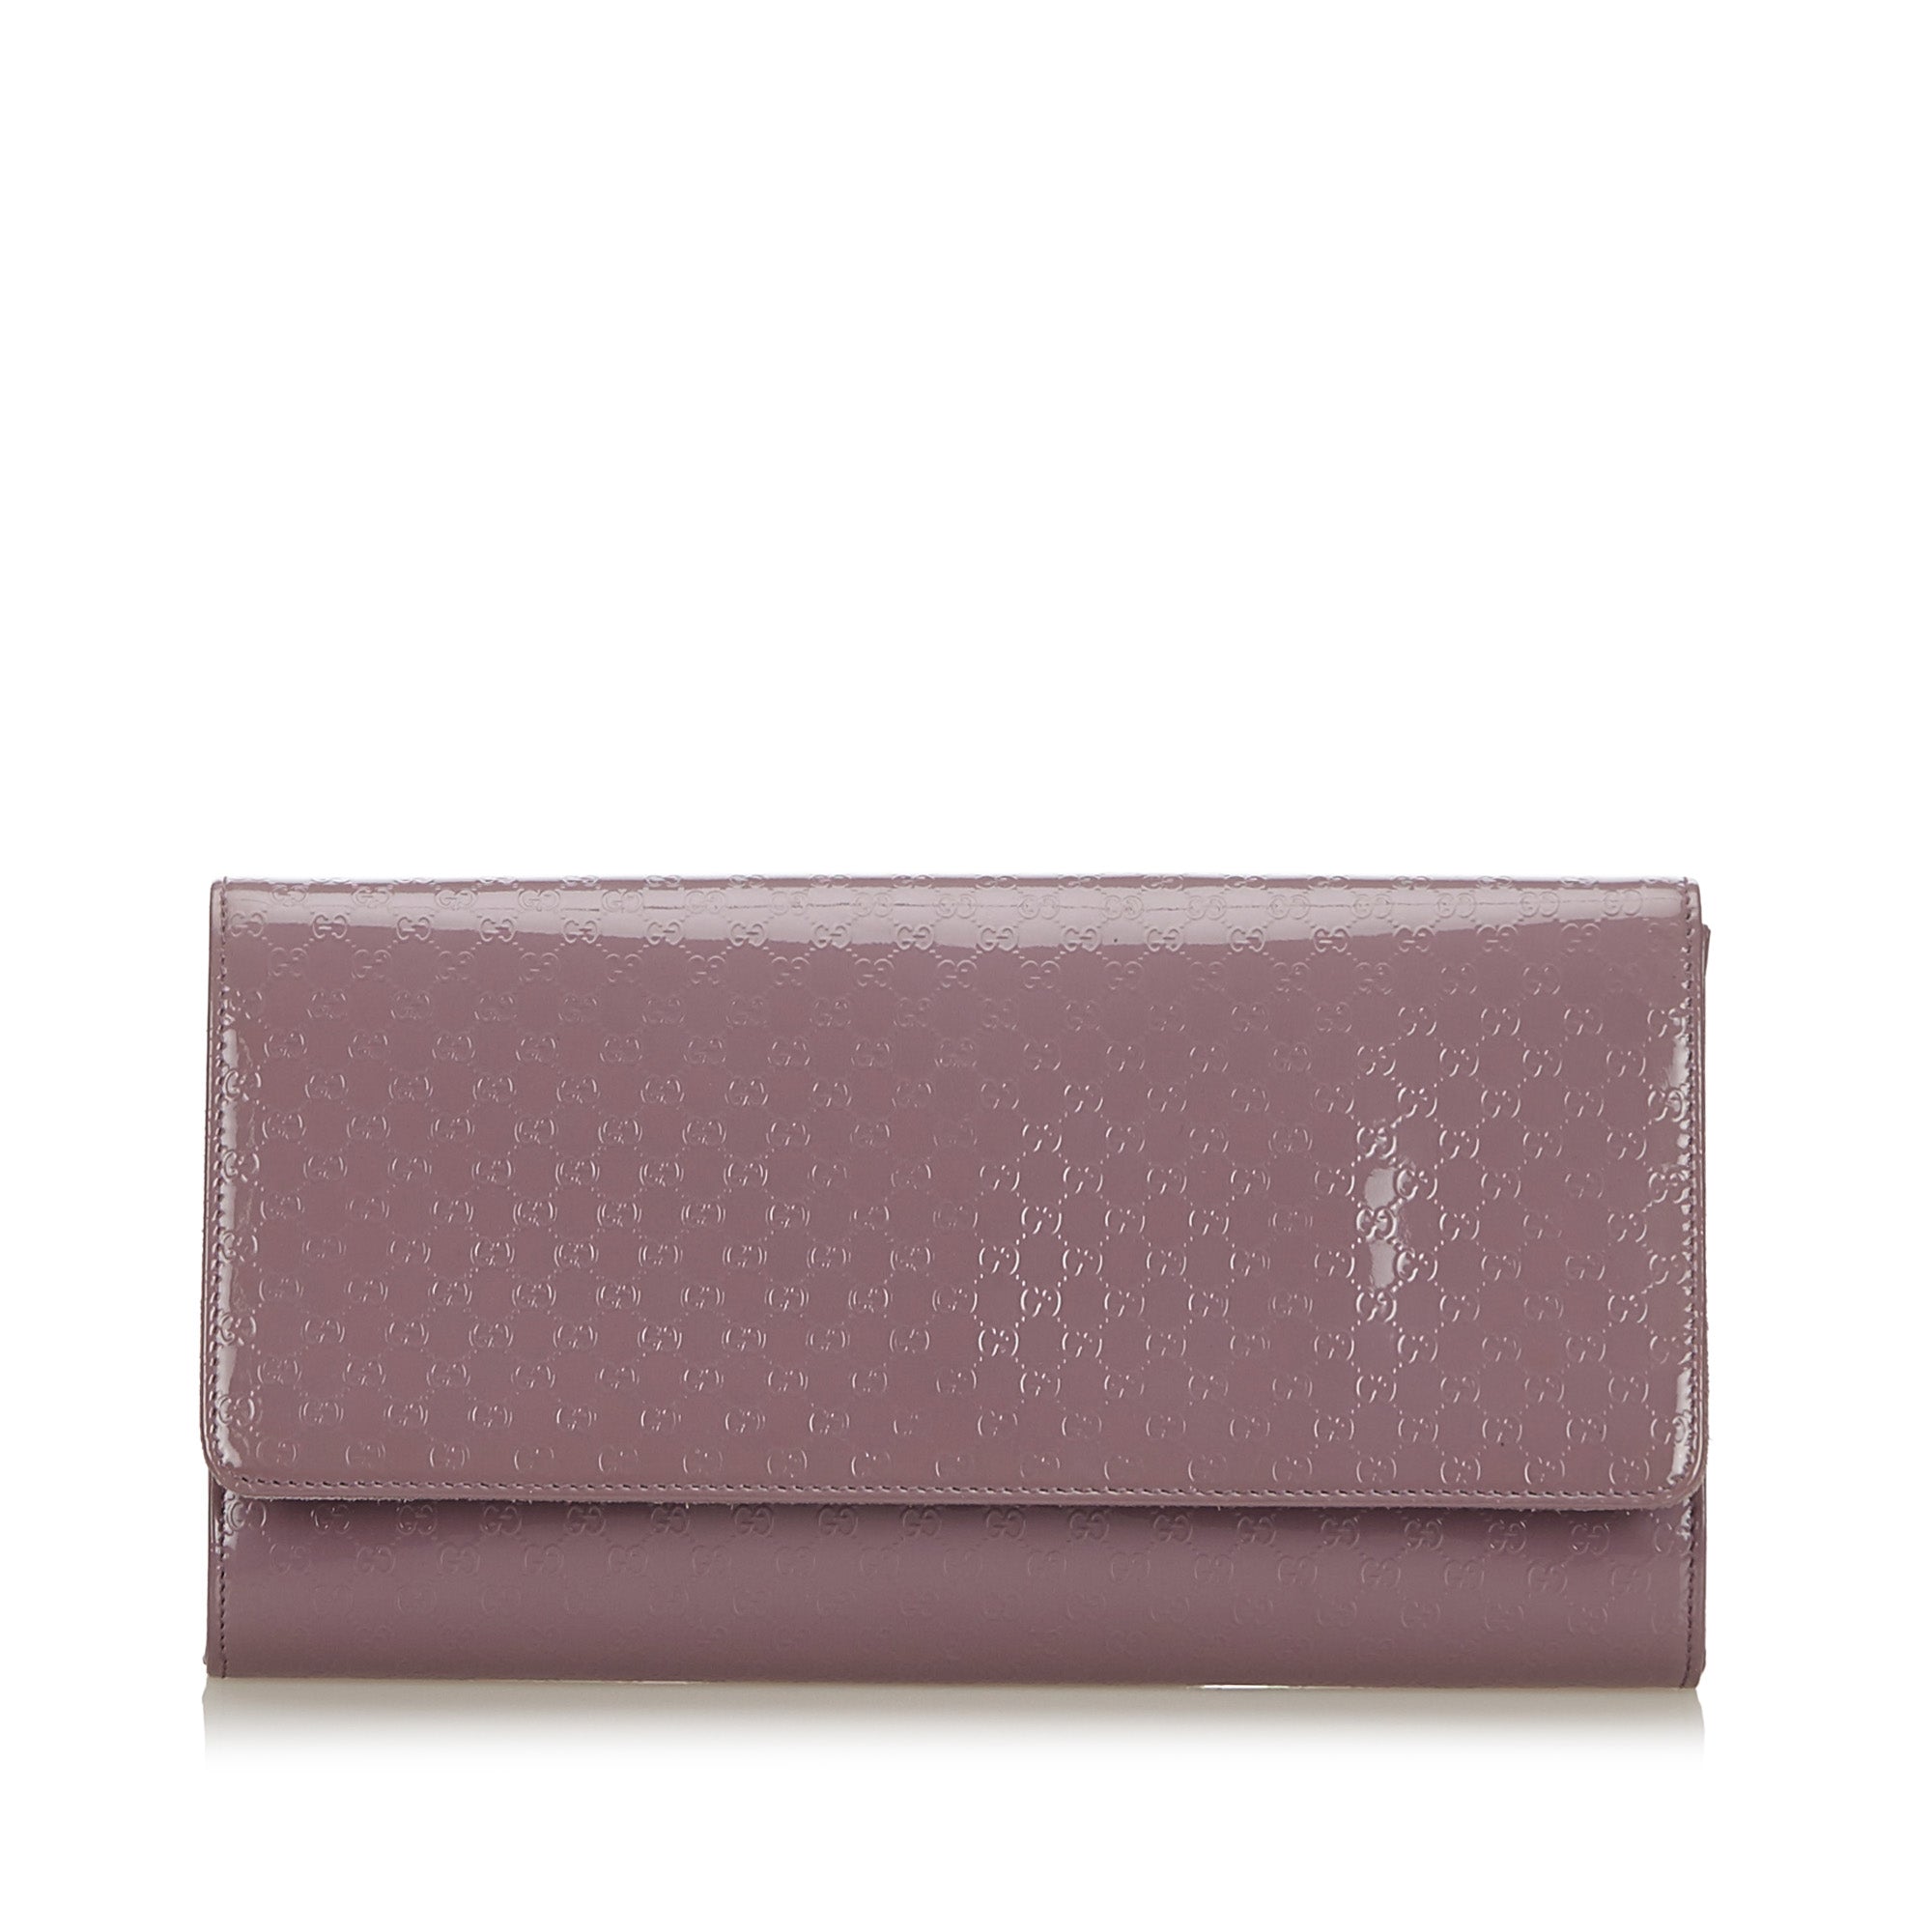 Buy & Consign Authentic Gucci Microguccissima Broadway Clutch at The Plush Posh